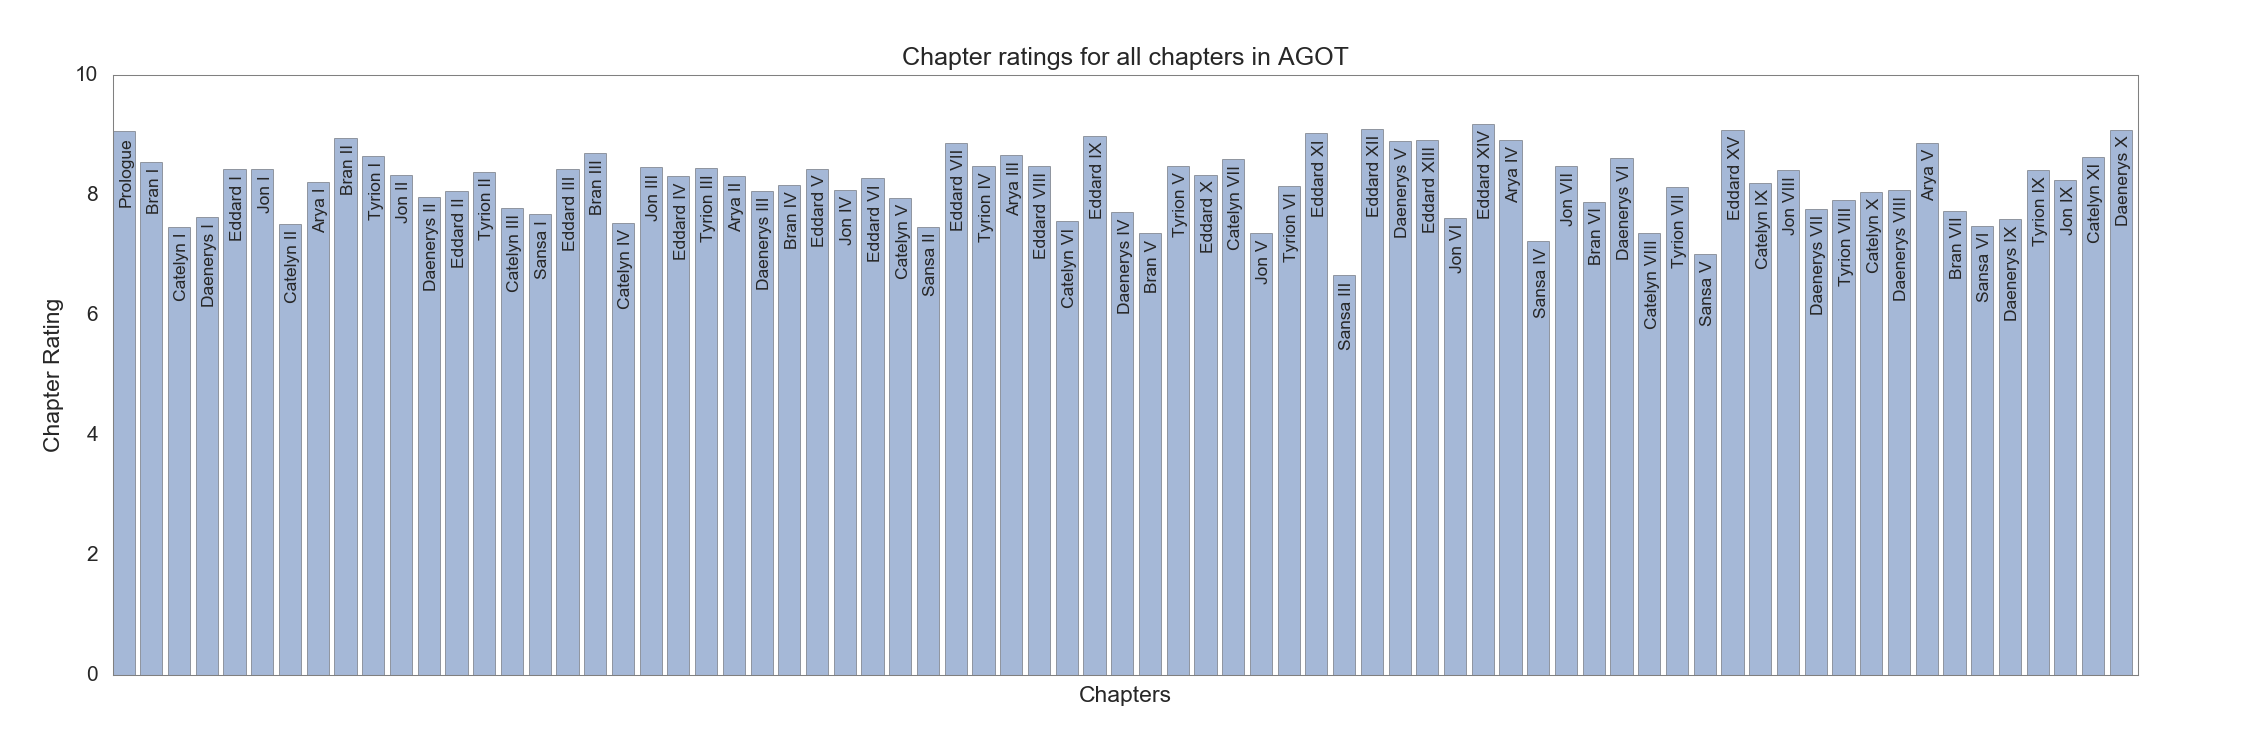 Chapter ratings in AGOT